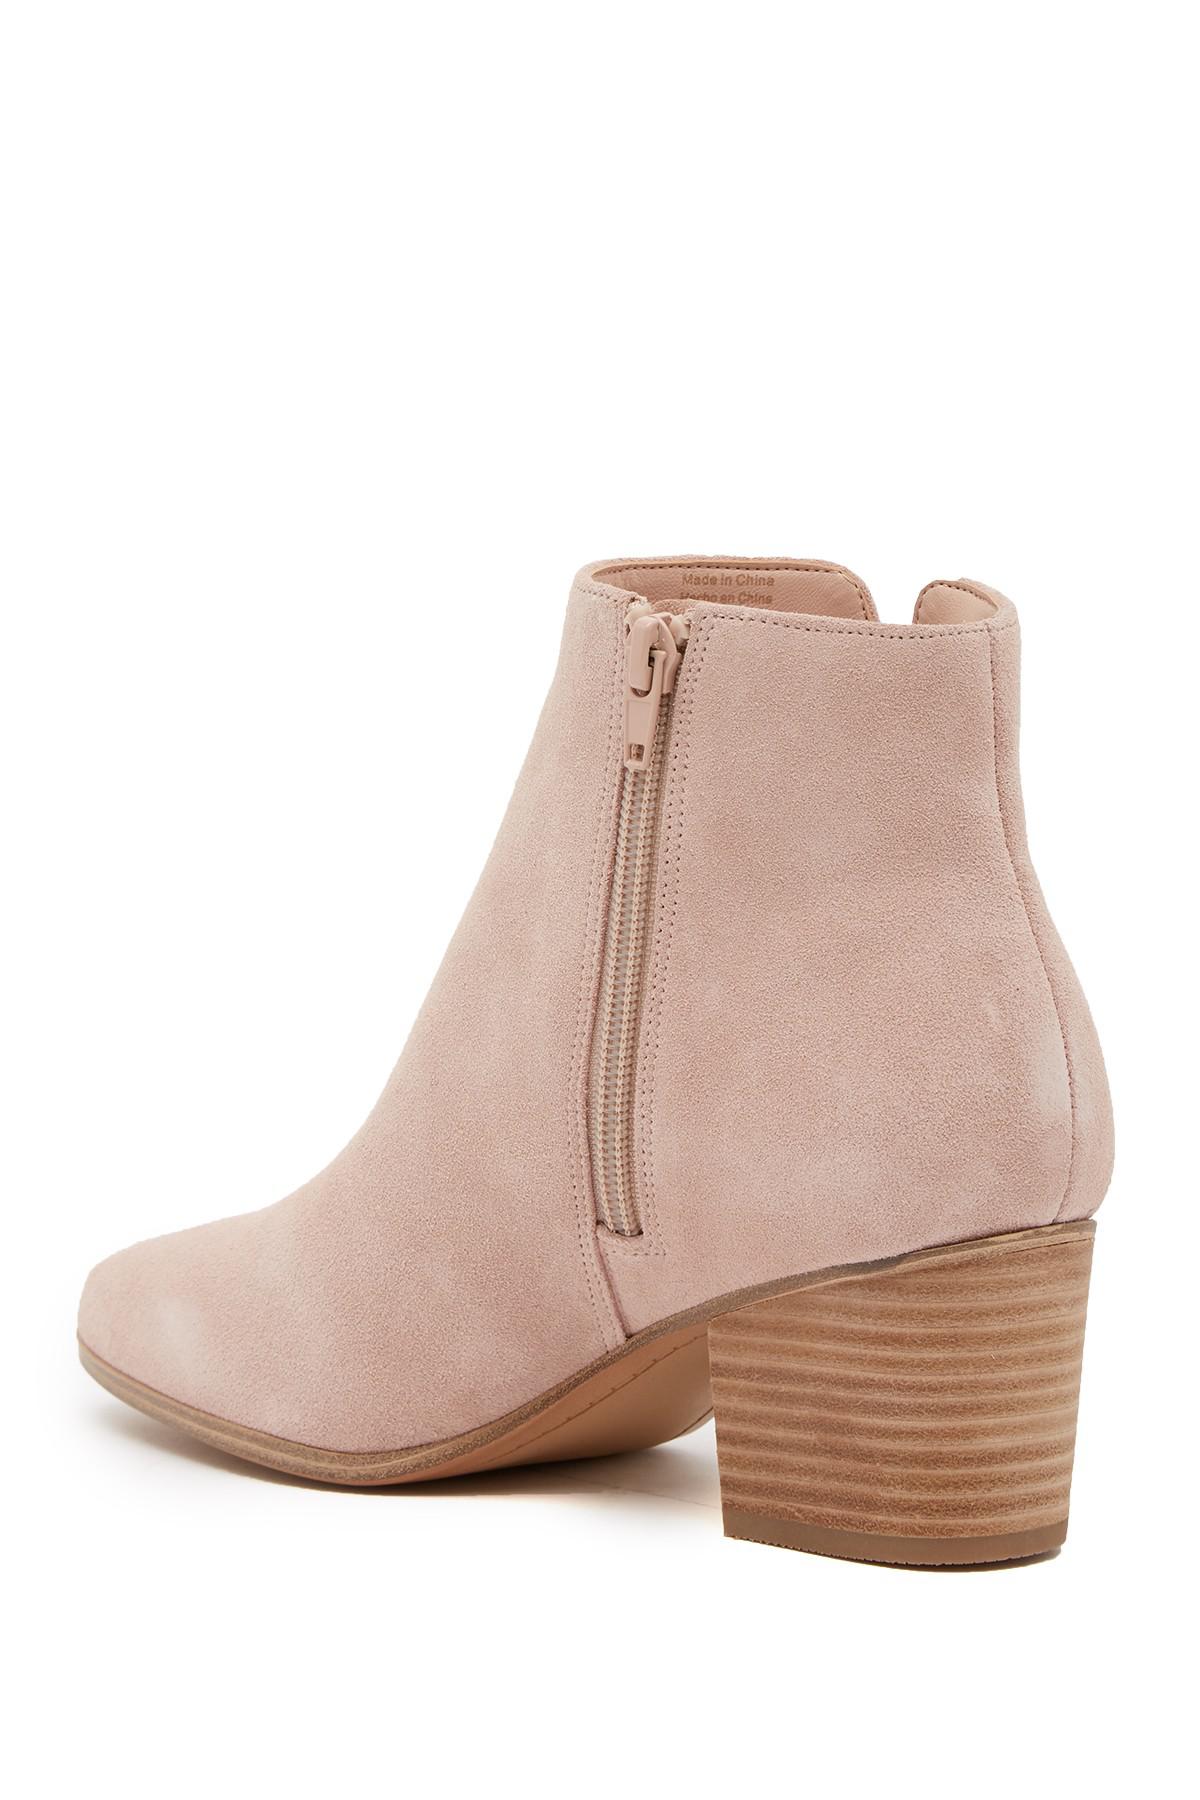 ALDO Sevi Suede Ankle Boot in Light Pink (Pink) - Lyst